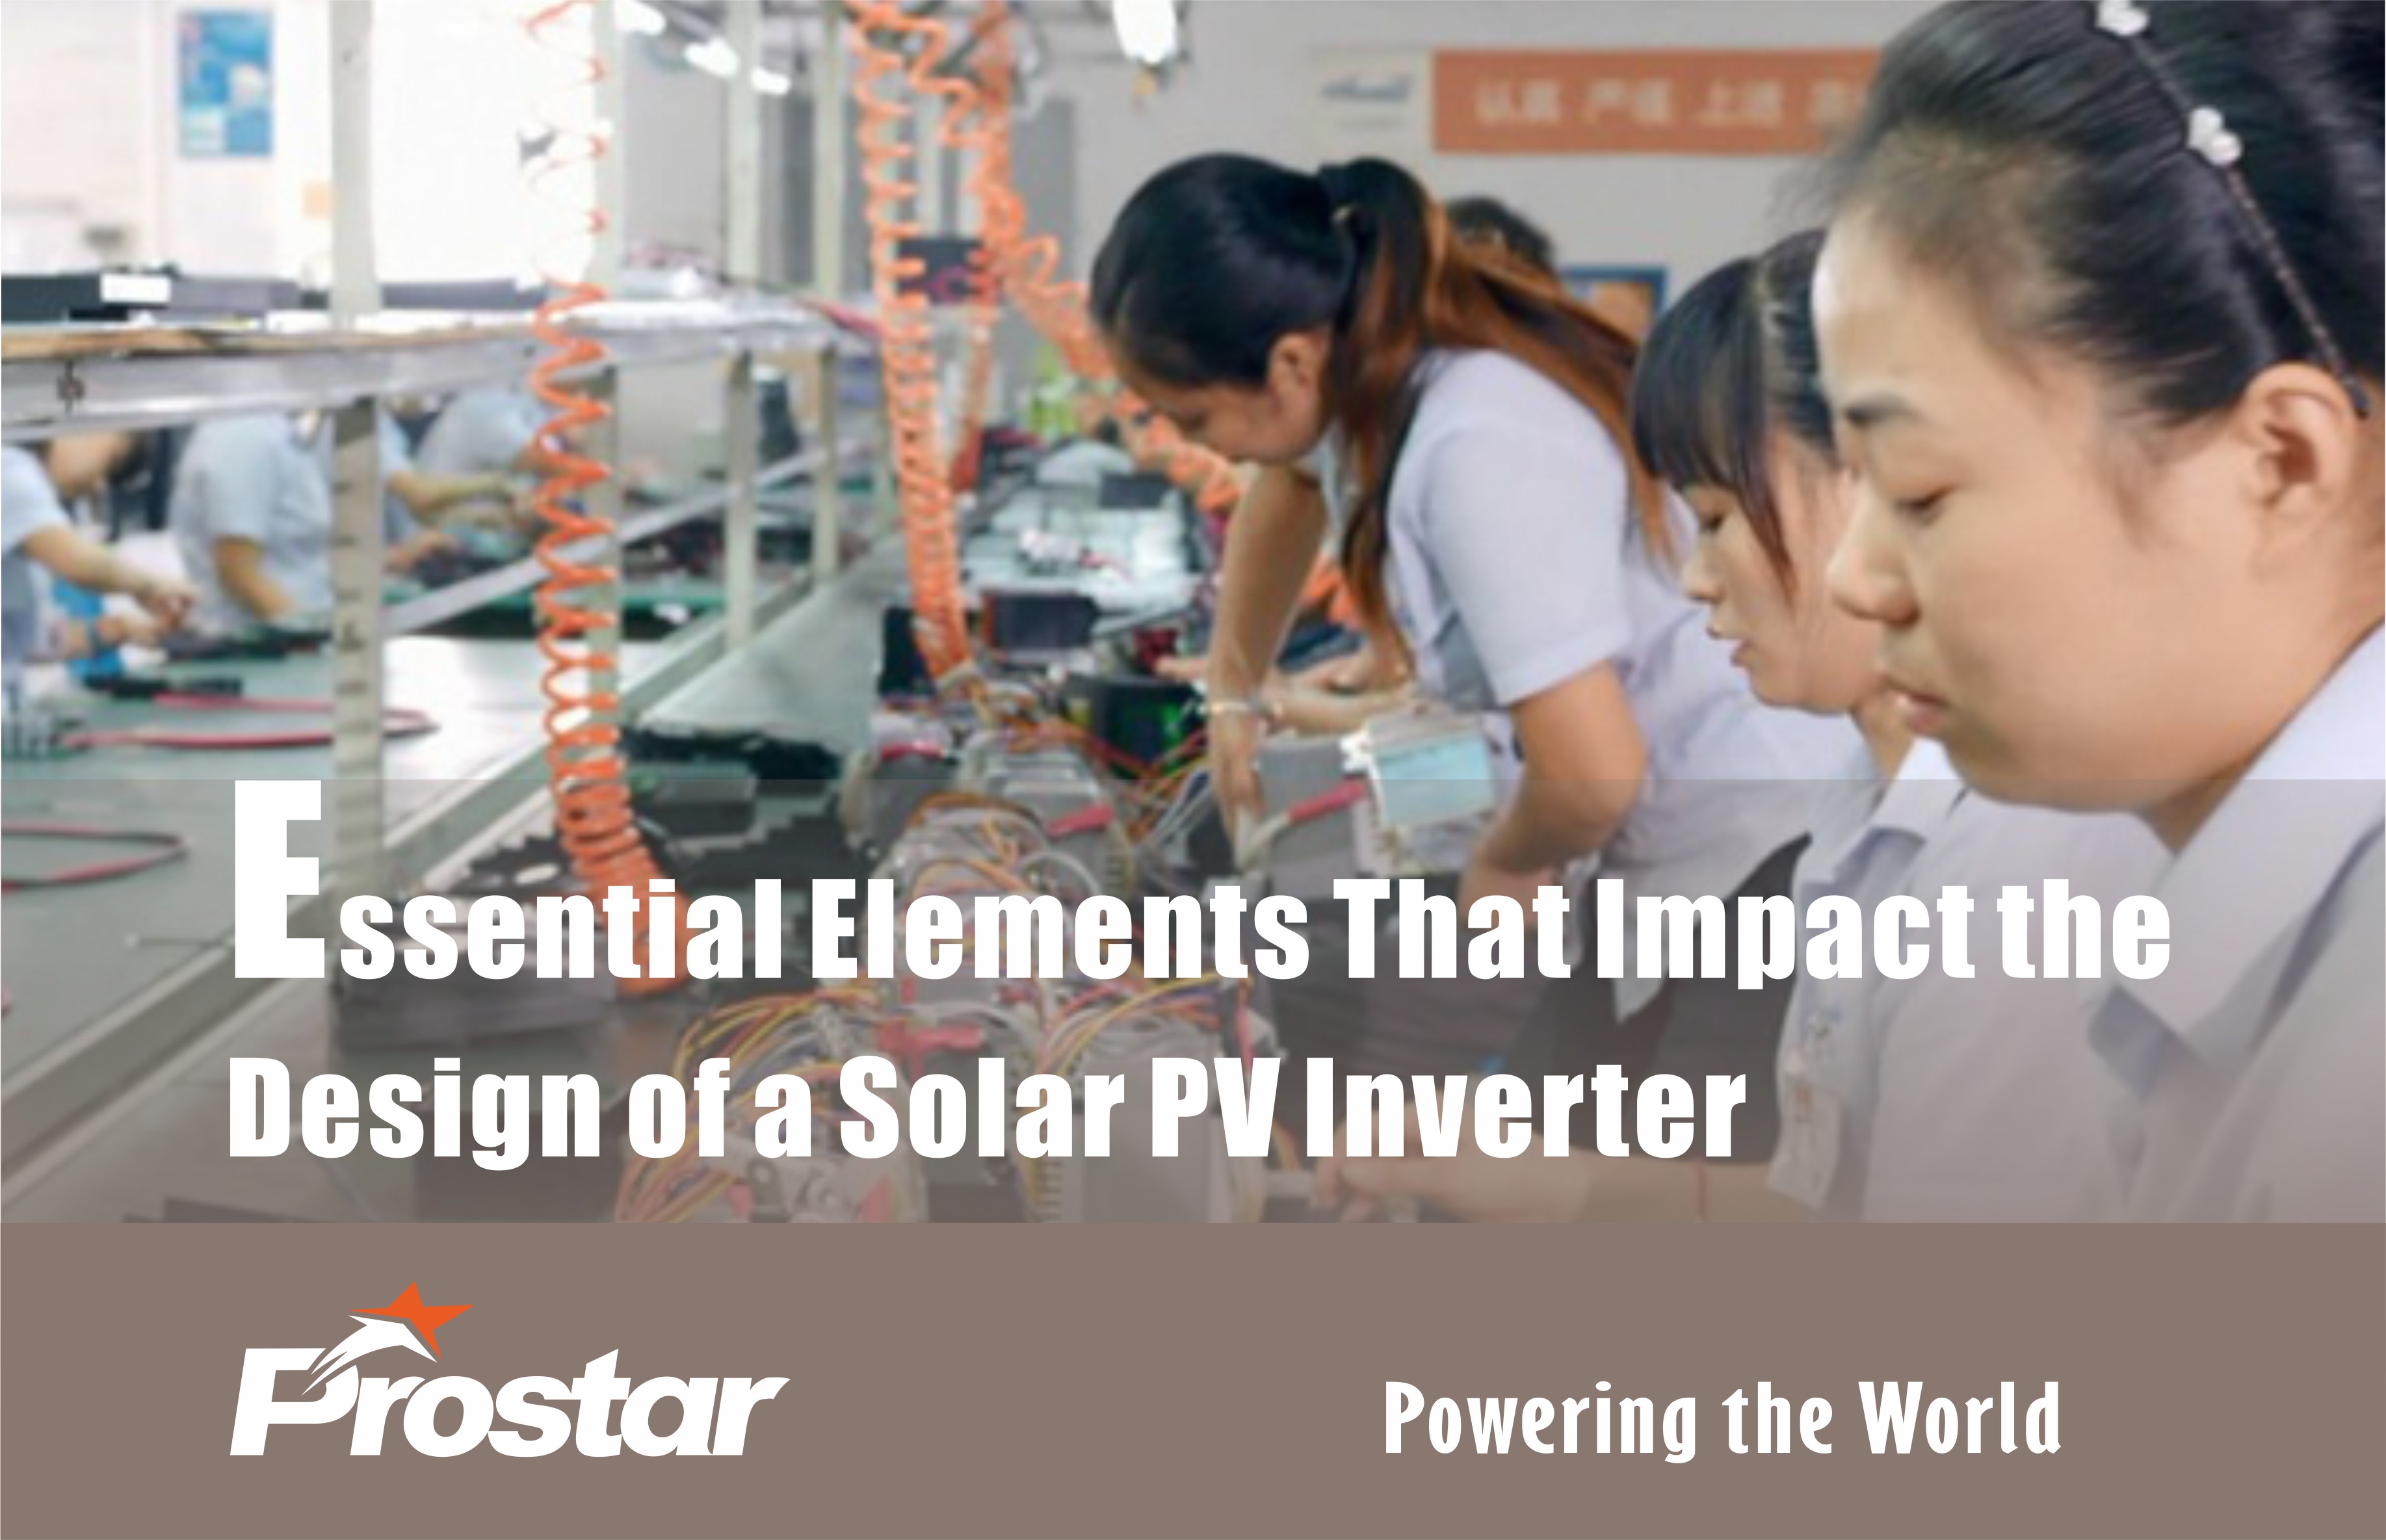 Essential Elements That Impact the Design of a Solar PV Inverter